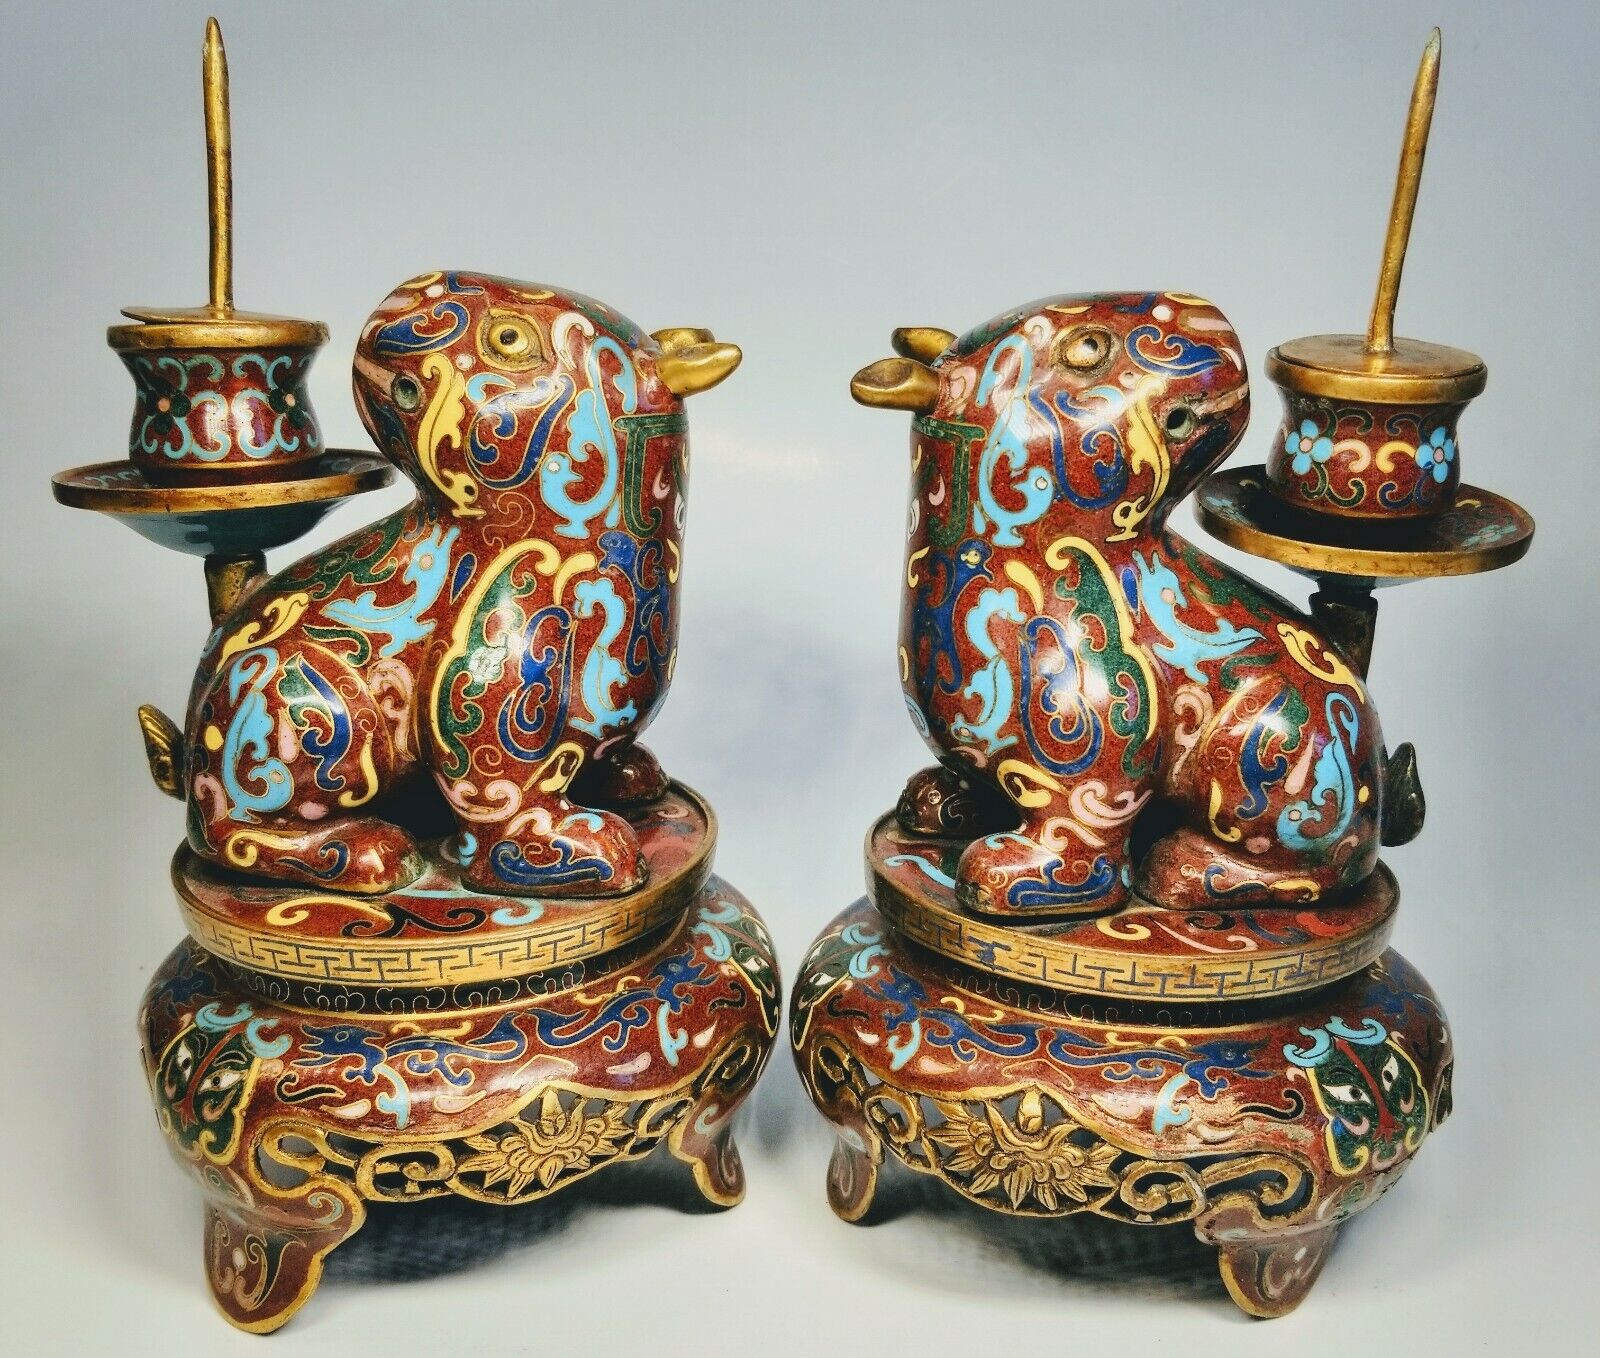 Antique 1920s Chinese Cloisonné Enamel on Foo Dog Bronze Pricket Candleholders